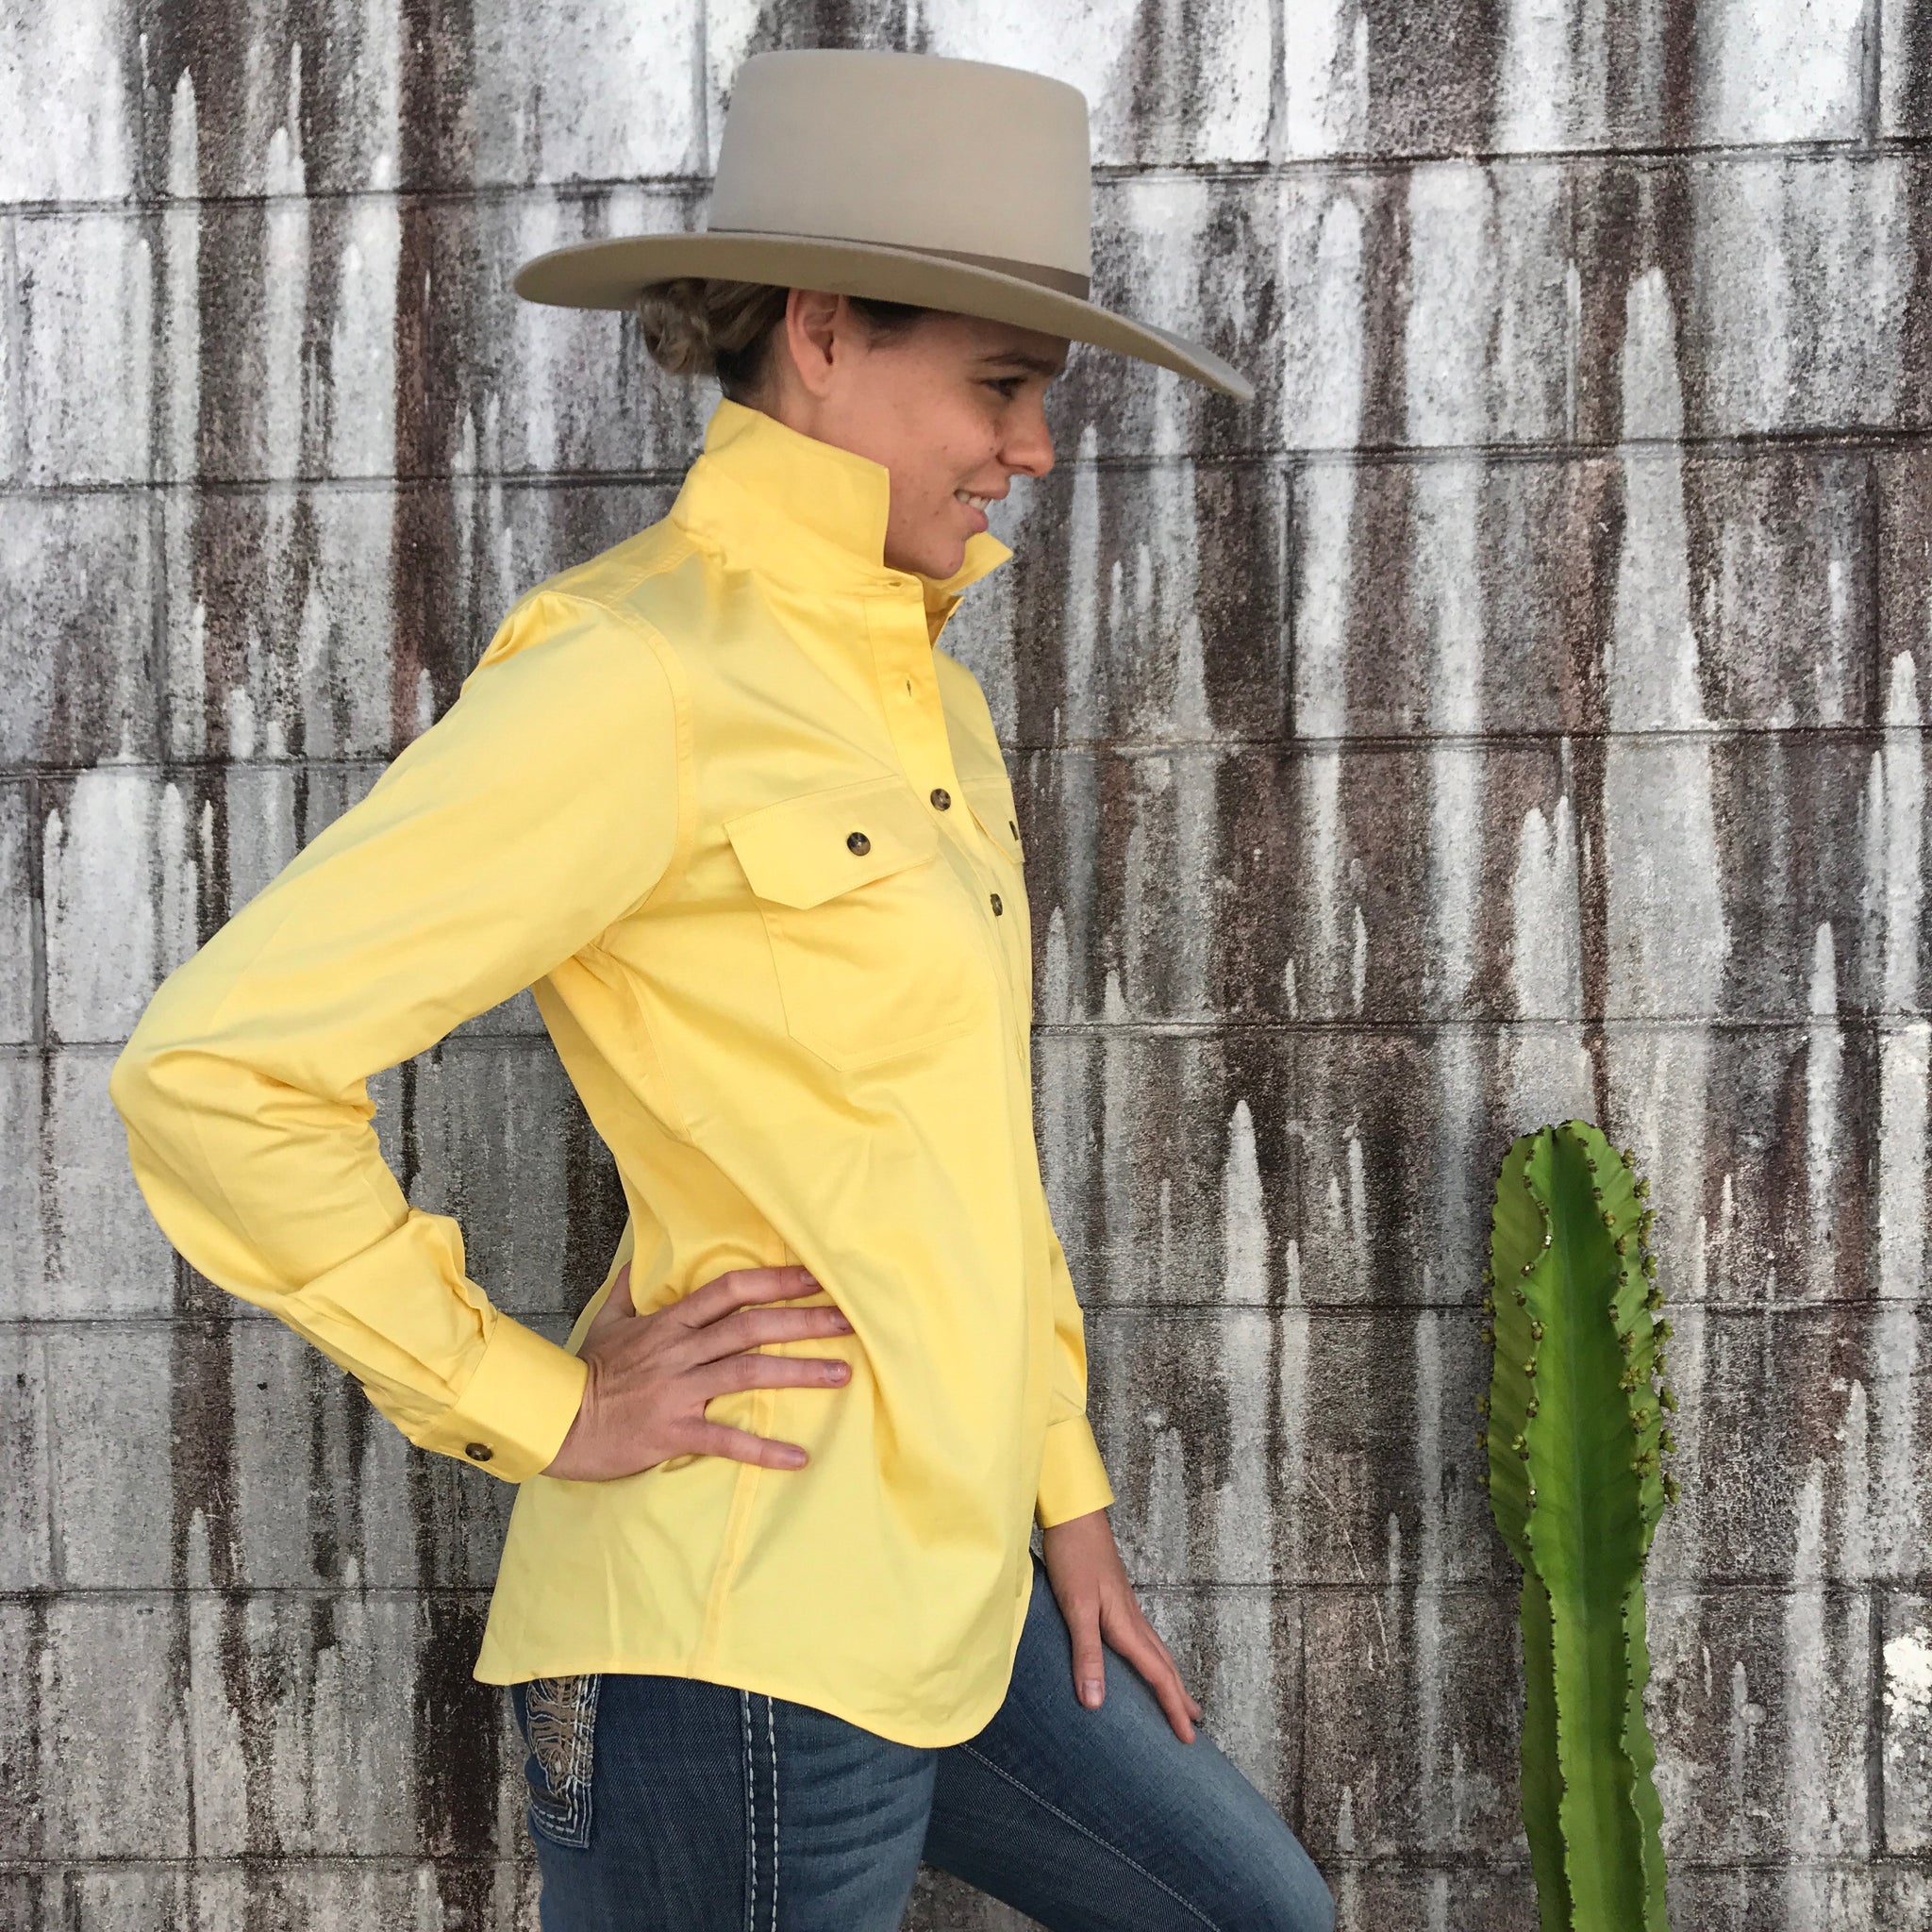 50505BUT Ladies Jahna Workshirt Butter - Just Country